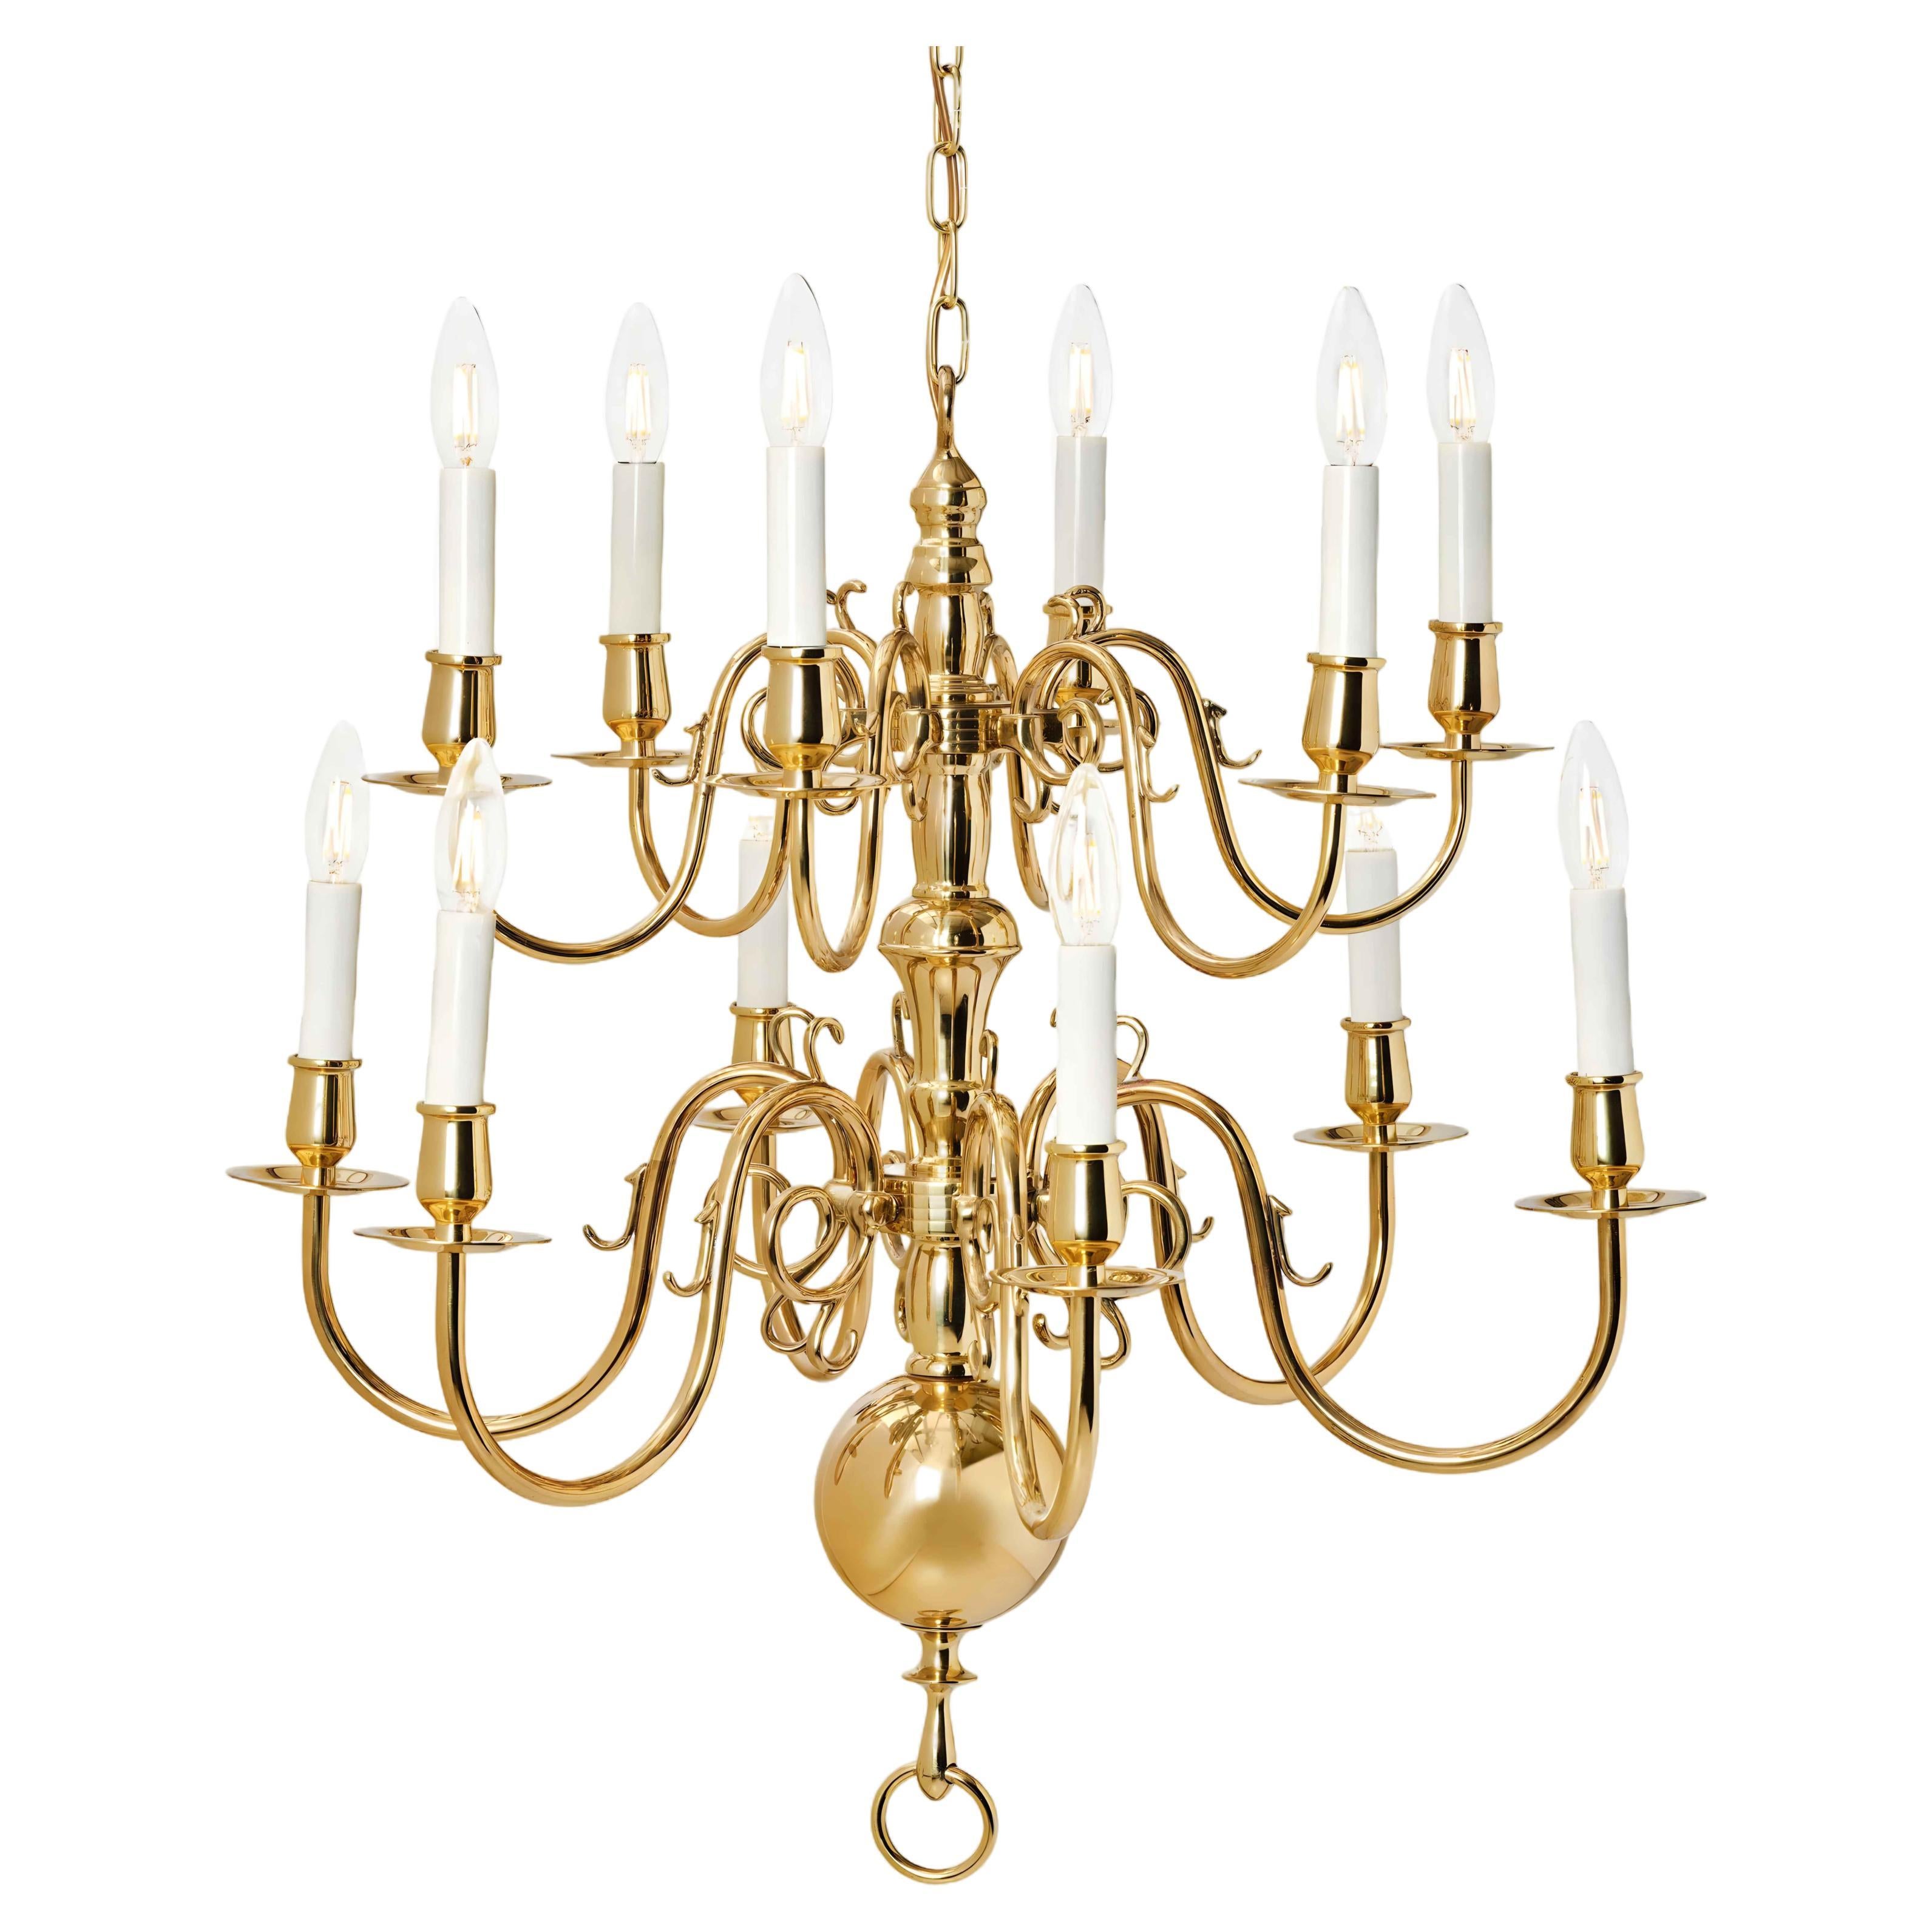 2 Tier 19th Century Electric Model Dutch Brass Chandelier with 12 Lights H62xW54 For Sale